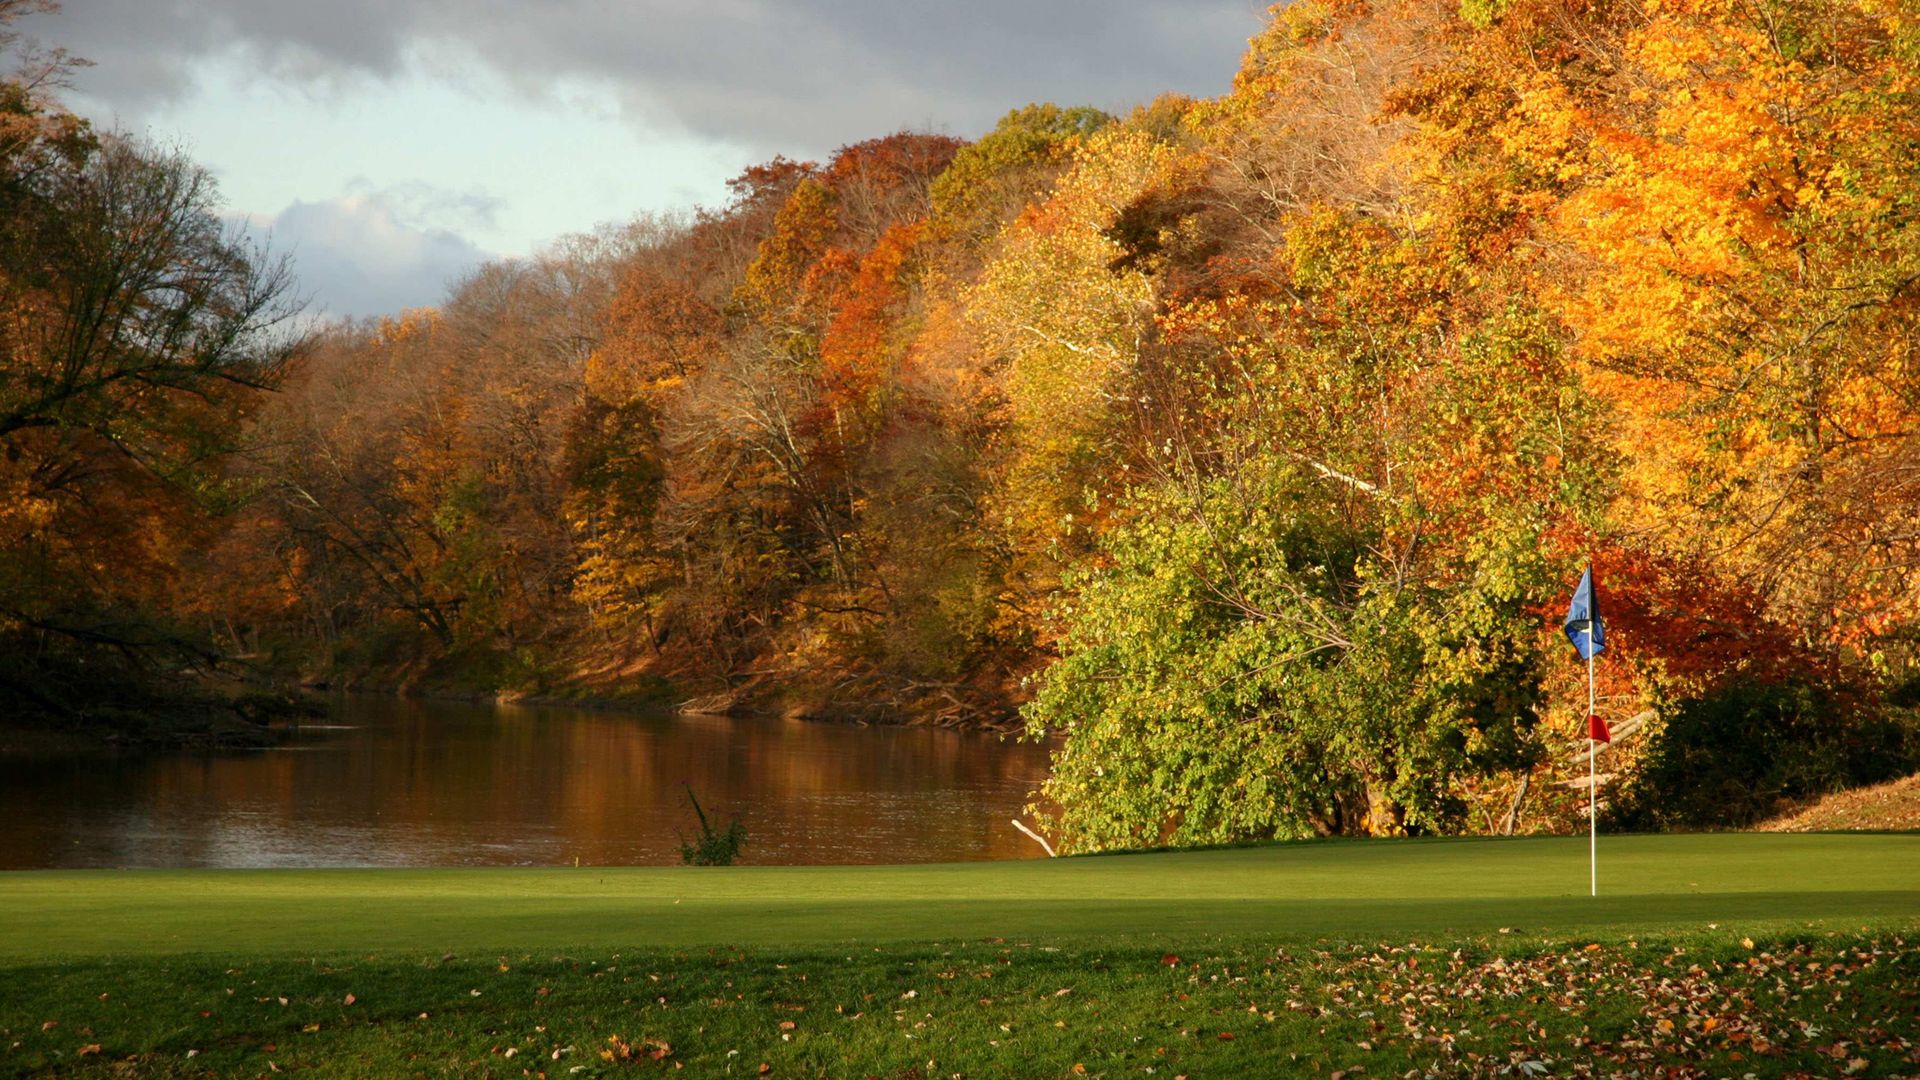 Free Download of Autumn Golf Course Wallpaper in 1080p